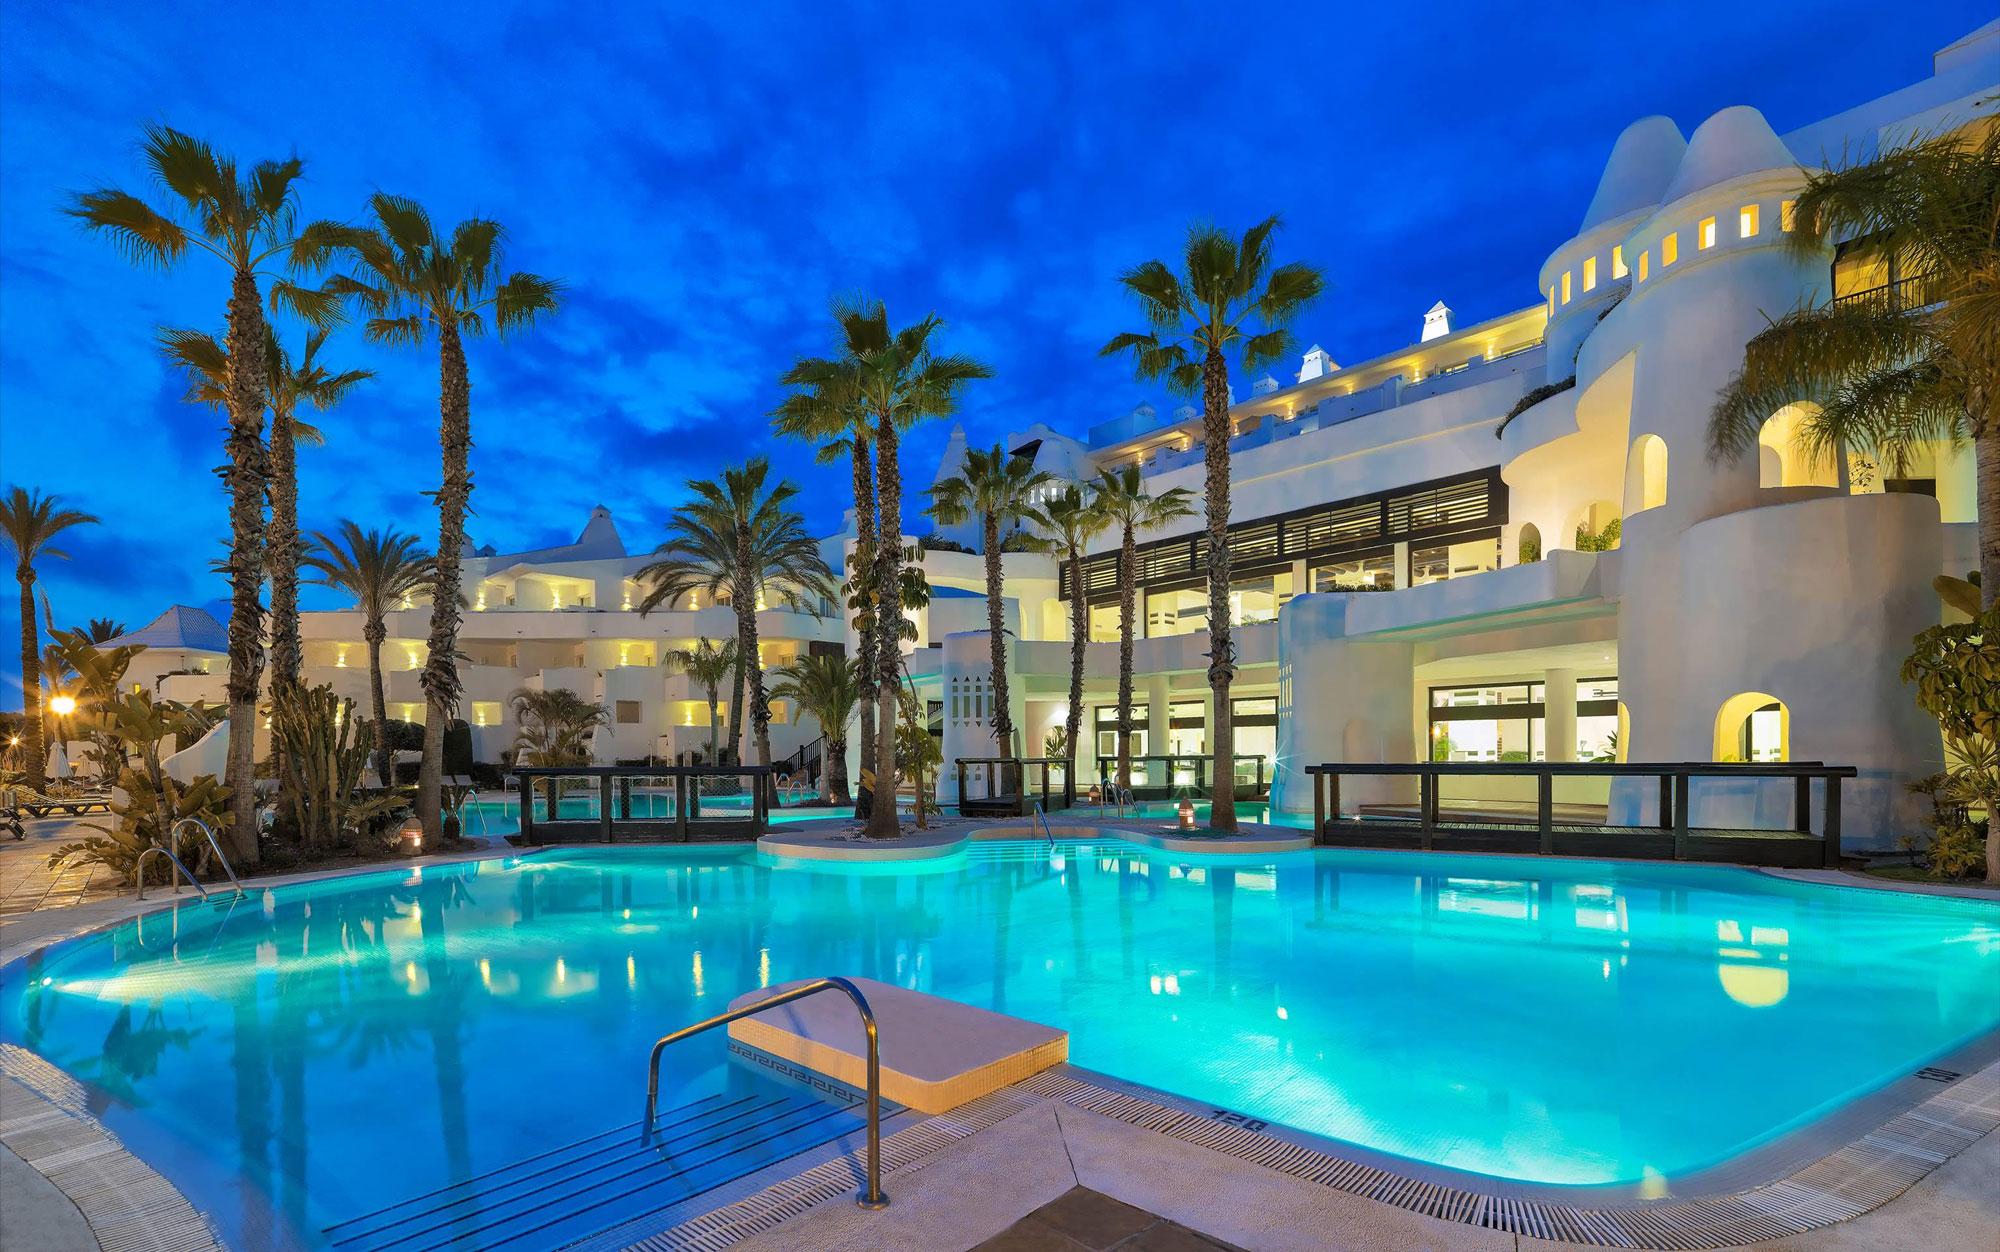 The H10 Estepona Palace's scenic outdoor pool situated in marvelous Costa Del Sol.